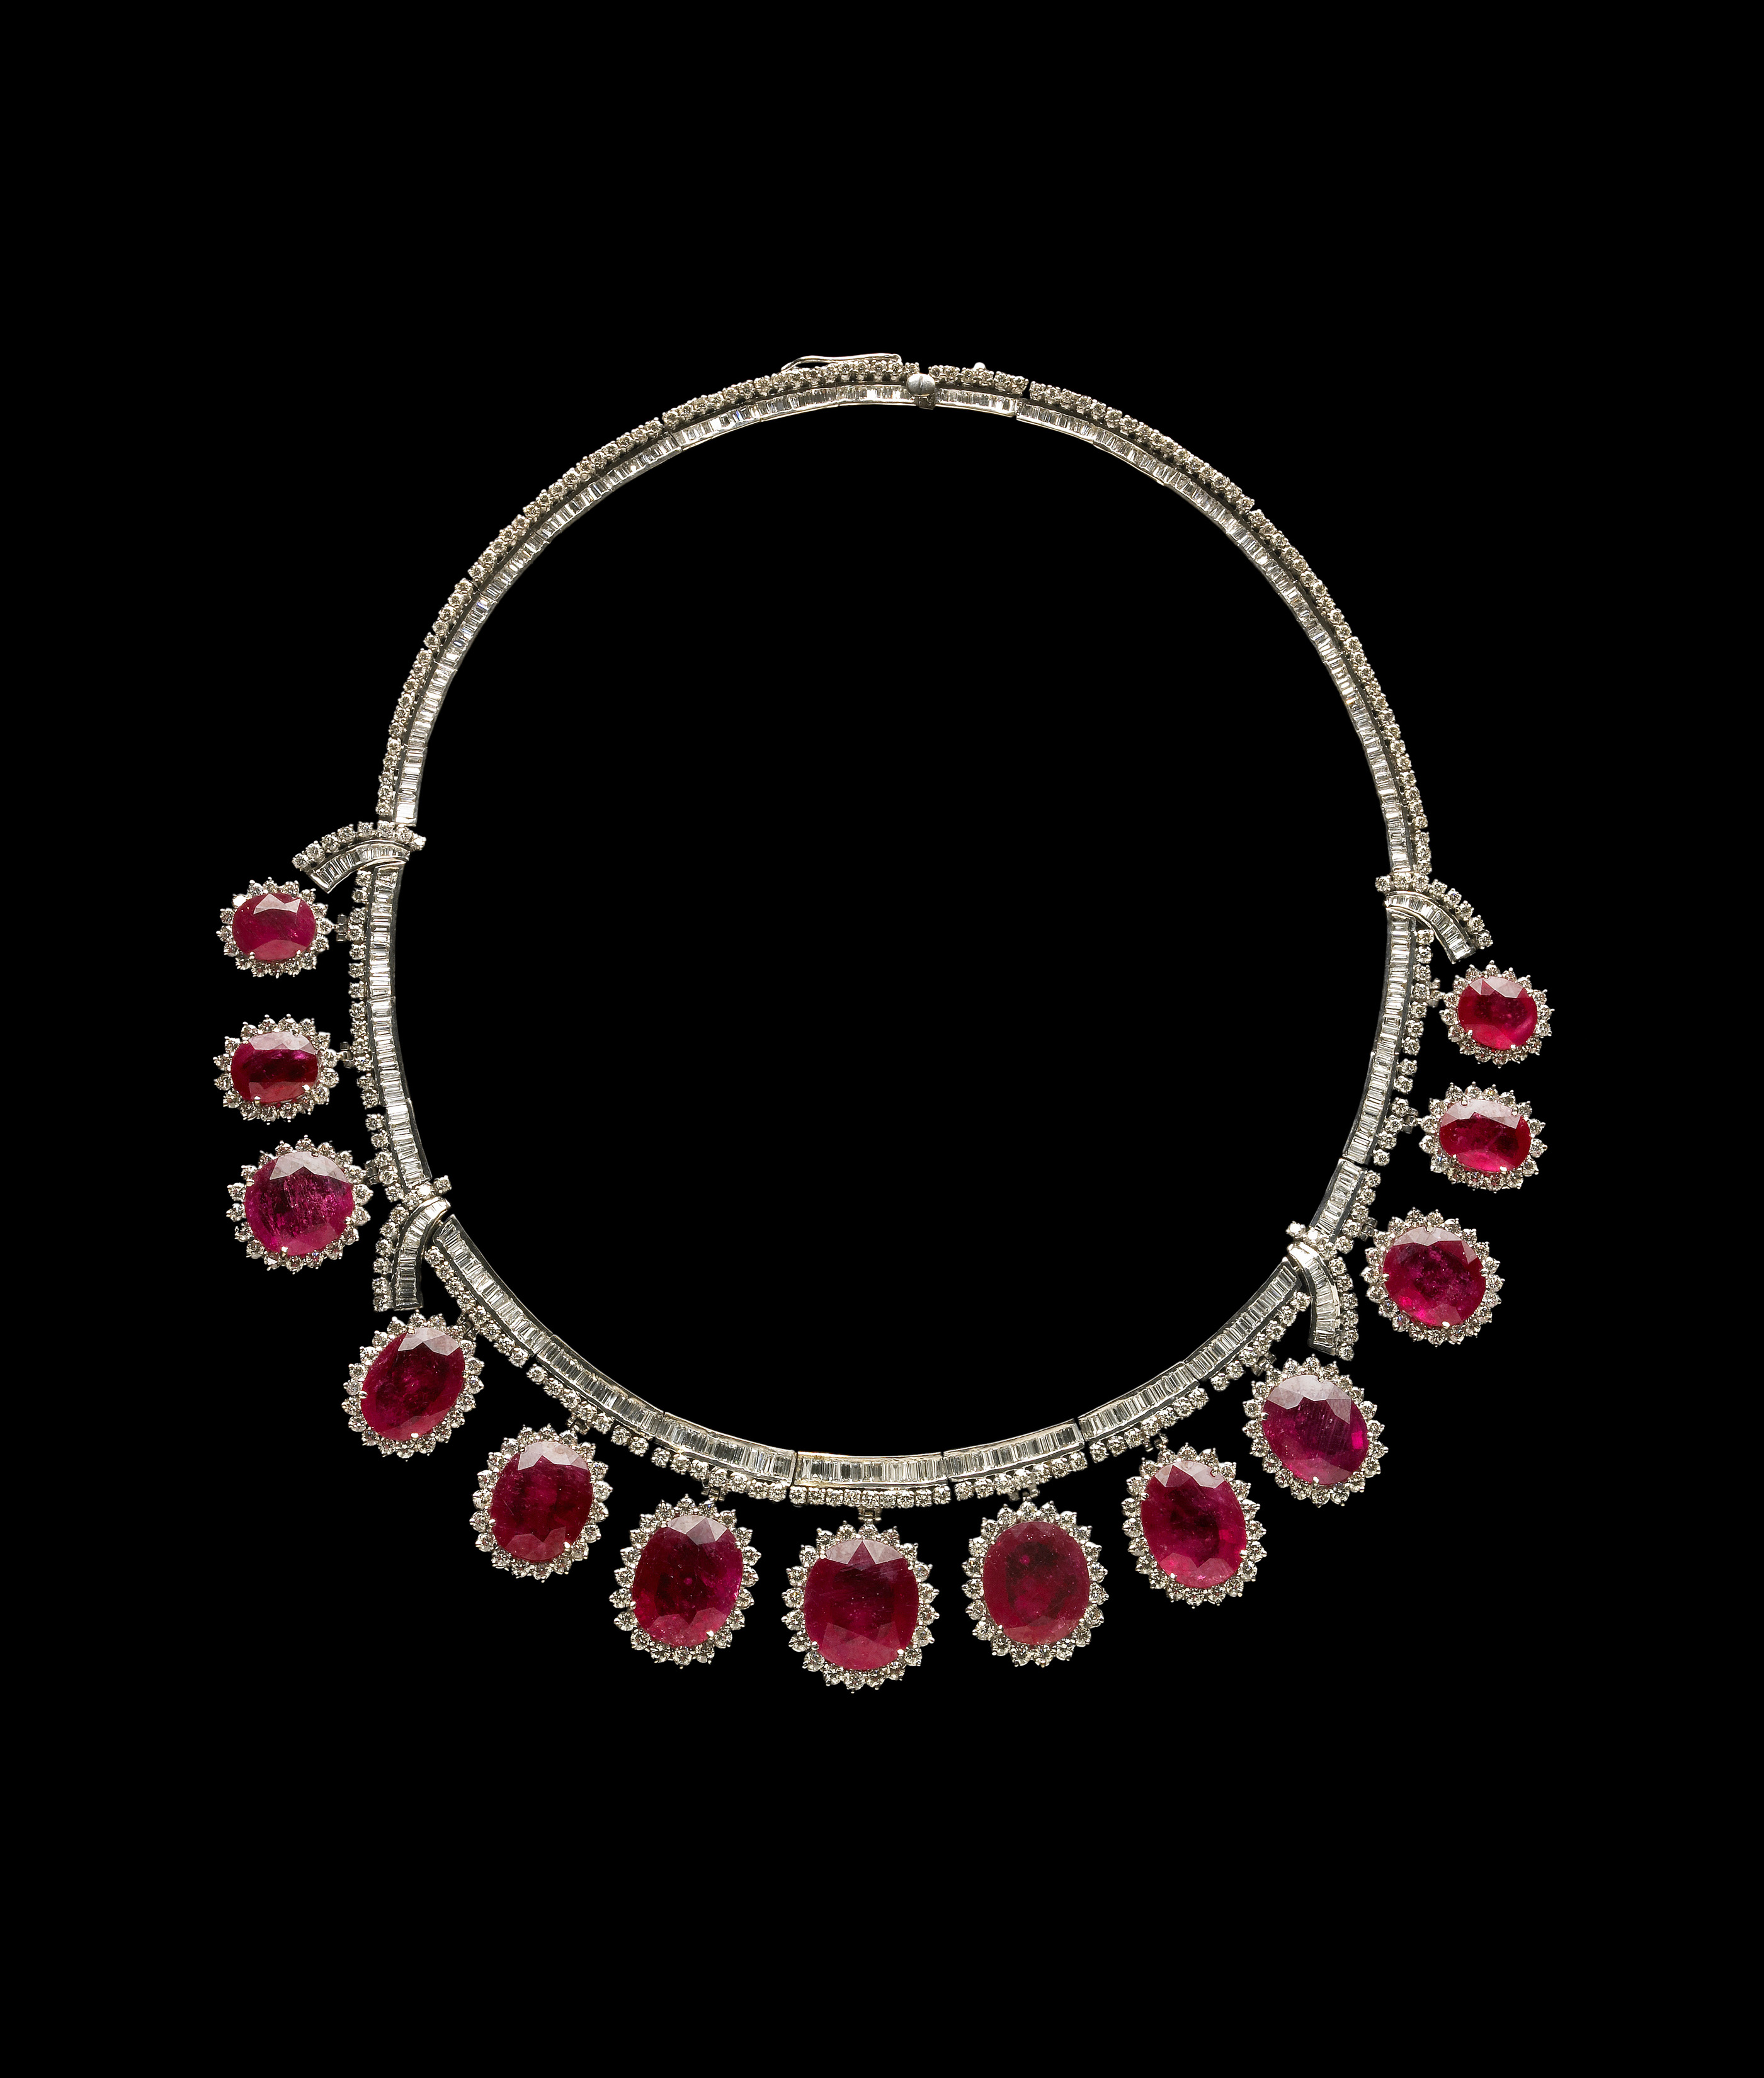 A ruby necklace, with 13 faceted oval rubies totaling 90 carats in weight, set in Platinum, hang from a collar of several hundred small baguette and round accent diamonds. Each oval ruby is surrounded by several round accent diamonds.